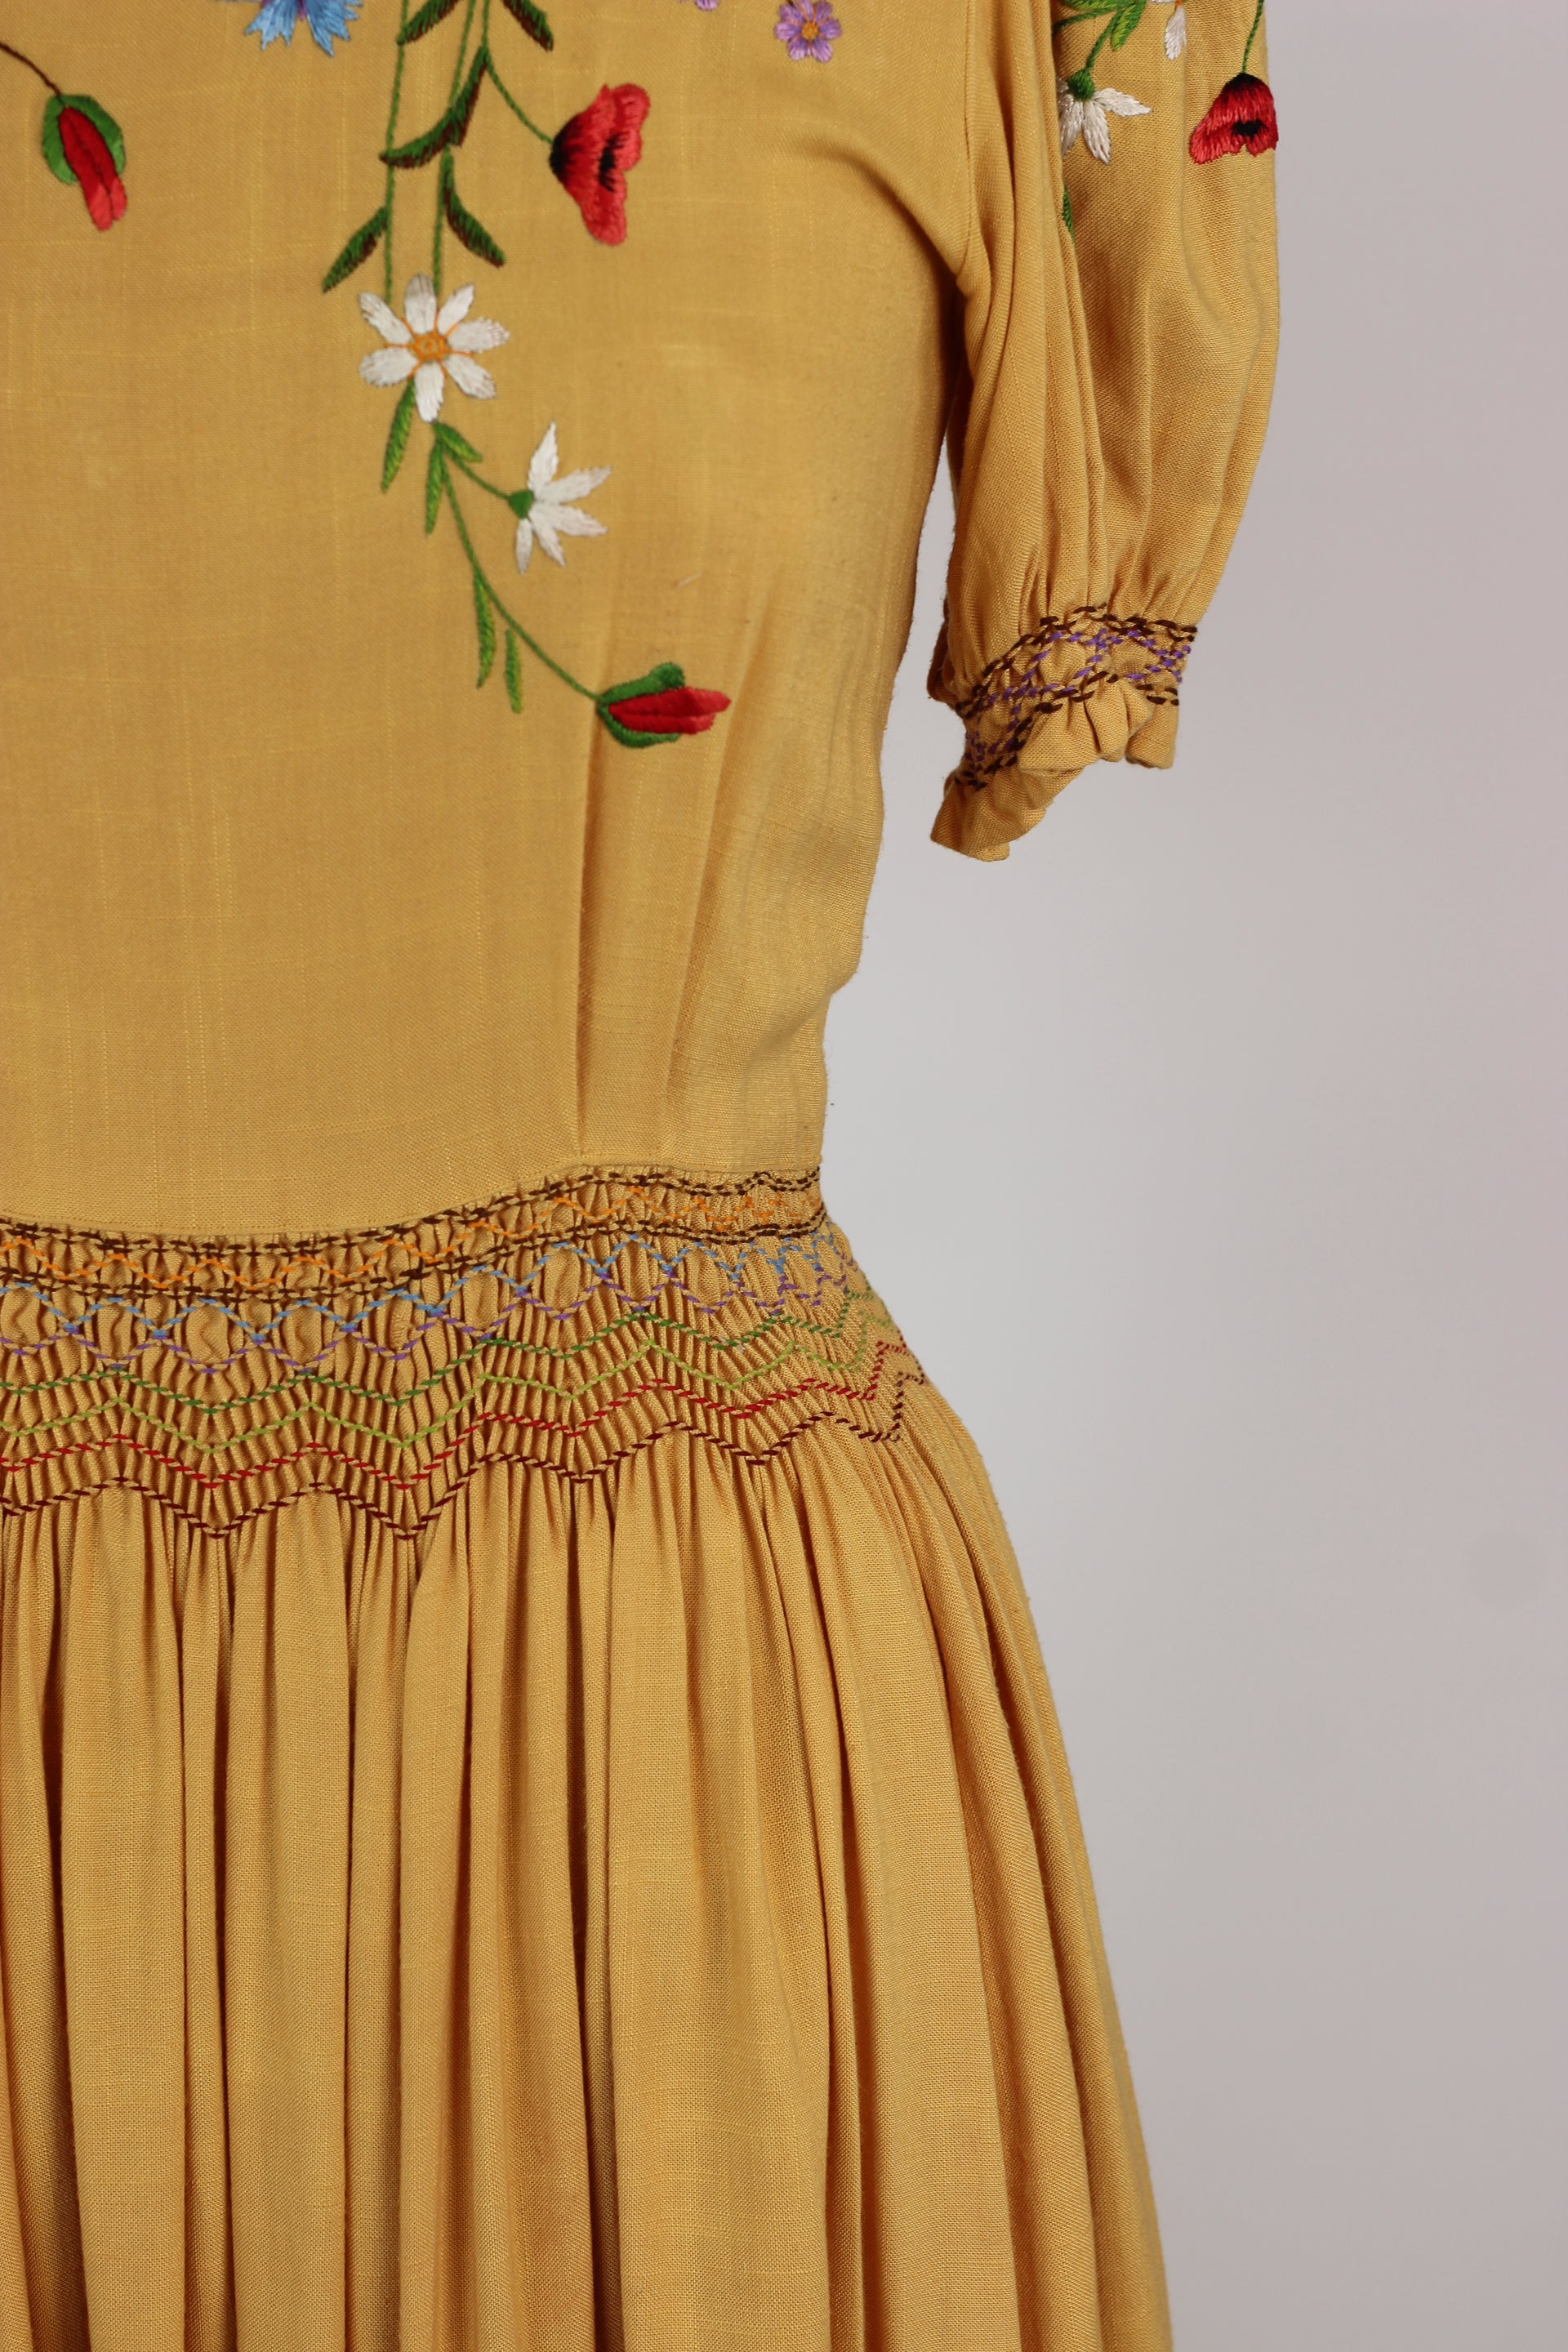 1930s 1940s Hungarian Peasant Hand Embroidered Short Sleeve Yellow Dress//Size S